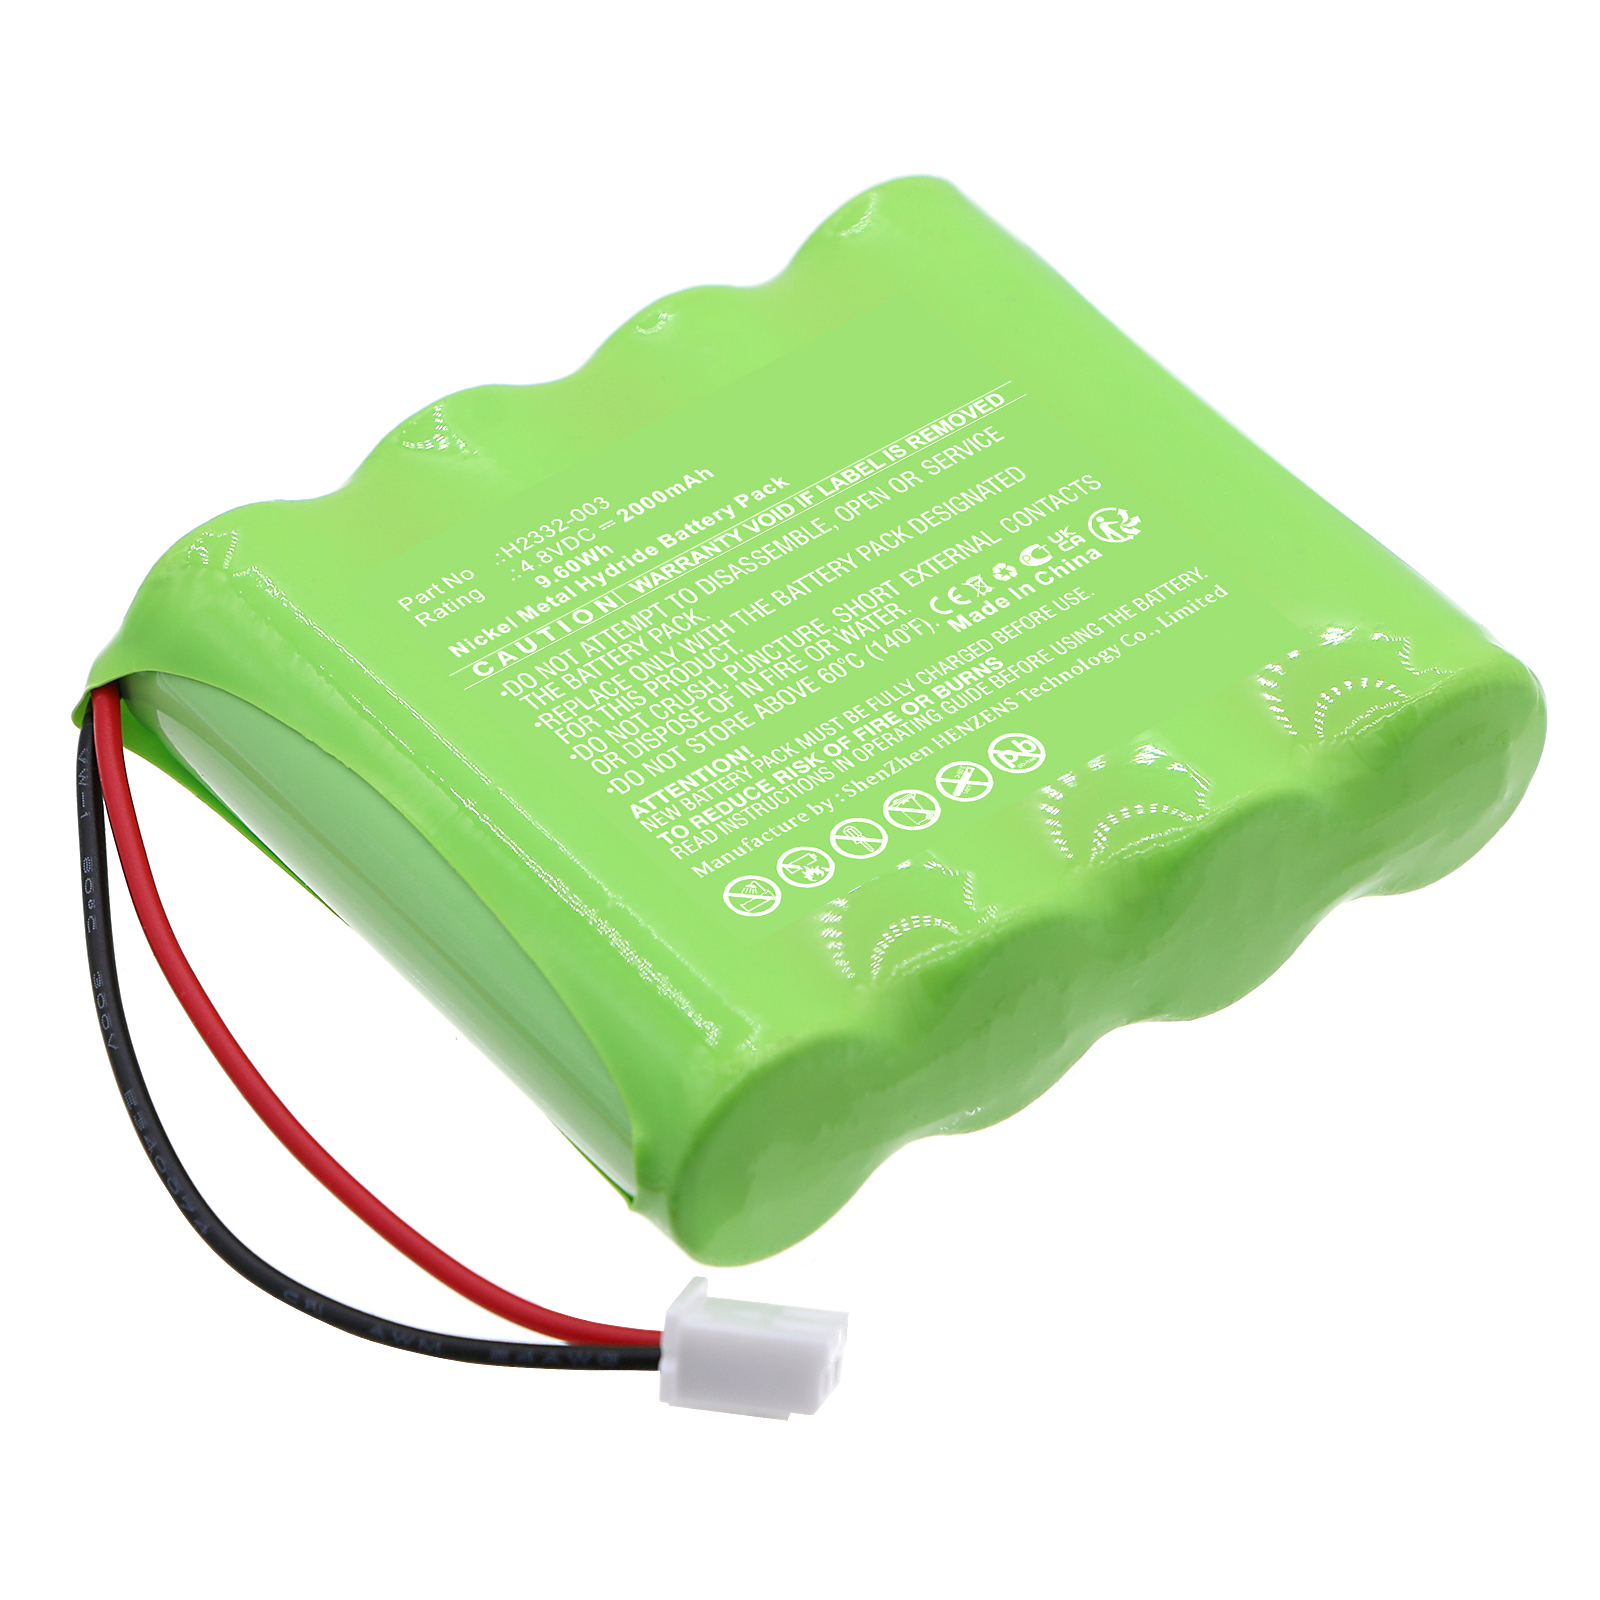 Synergy Digital Medical Battery, Compatible with ADE H2332-003 Medical Battery (Ni-MH, 4.8V, 2000mAh)